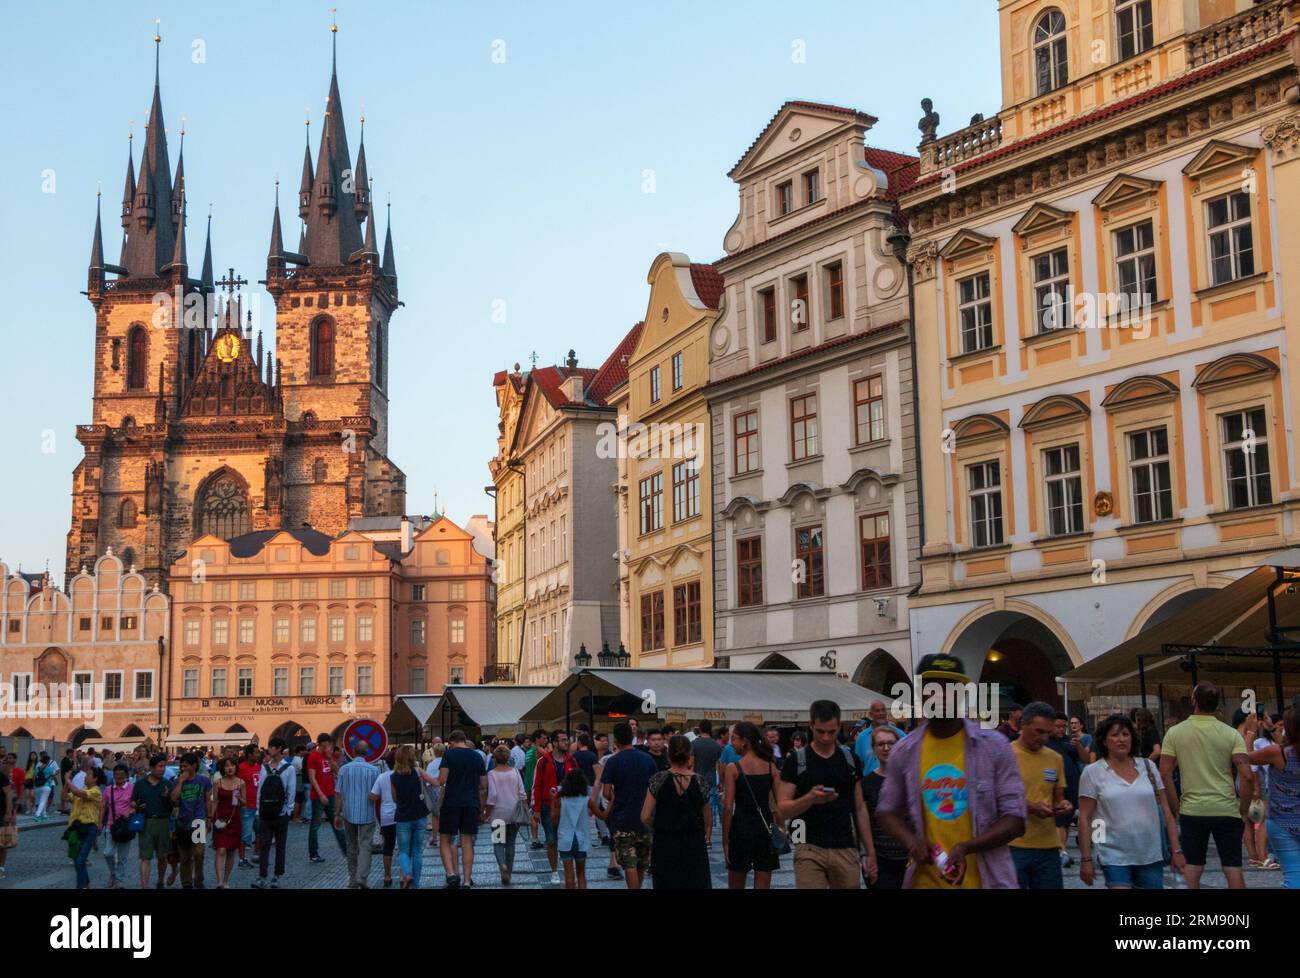 Prague, Czech Republic - August 4th 2017: Large crowd of tourists at Prague's Old Town Square in front of the beautiful Church of Our Lady before Týn Stock Photo